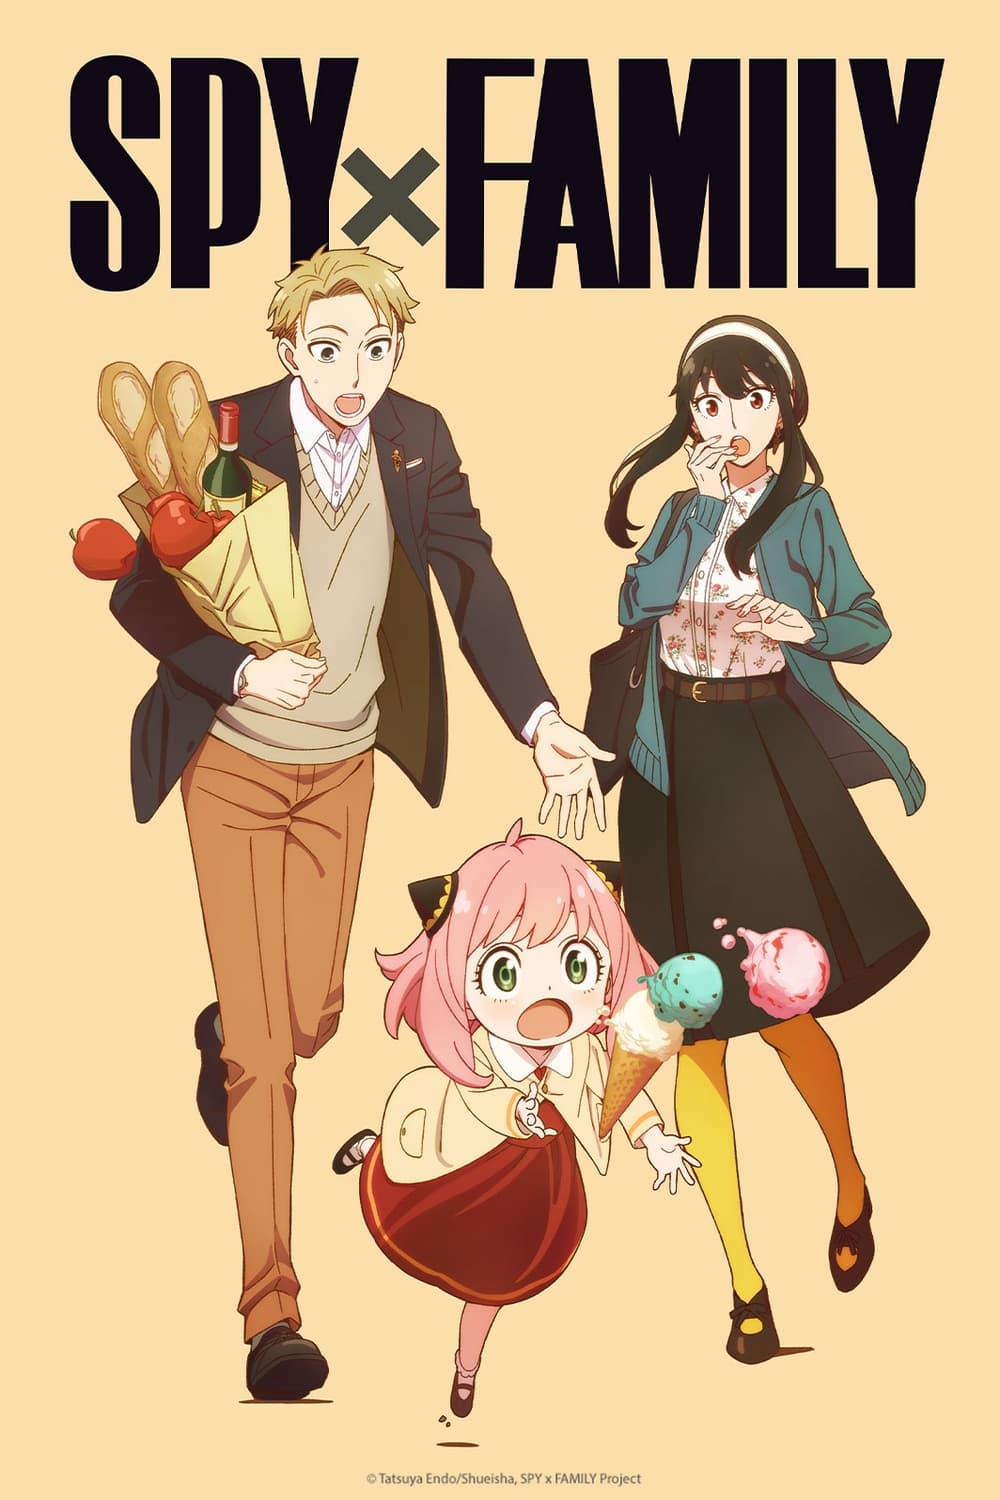 SPY×FAMILY TV Shows About Slice Of Life